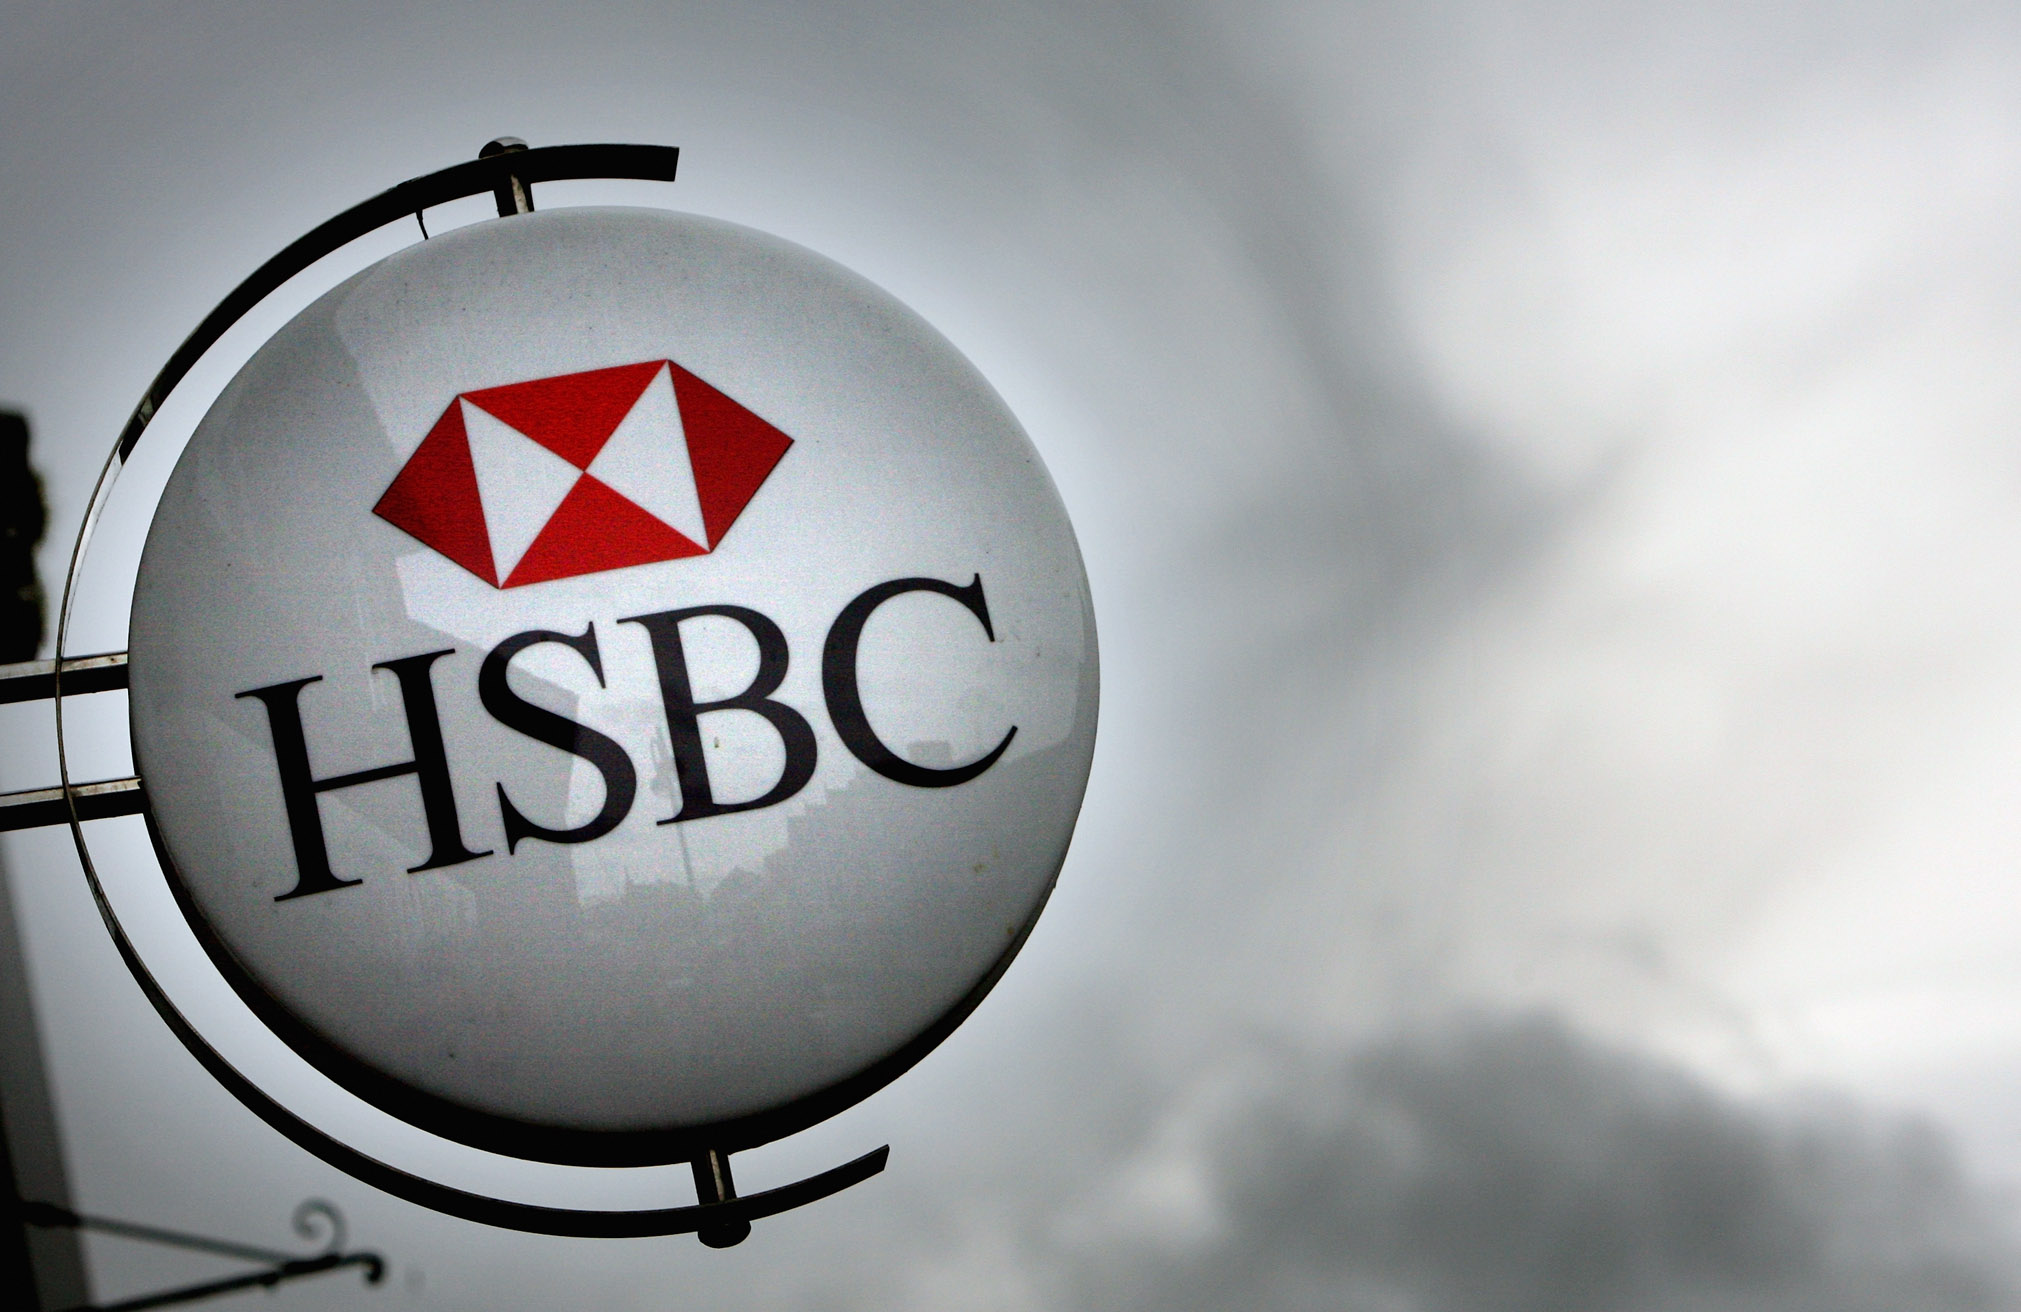 The HSBC logo is displayed in Street, England, on March 3, 2008.